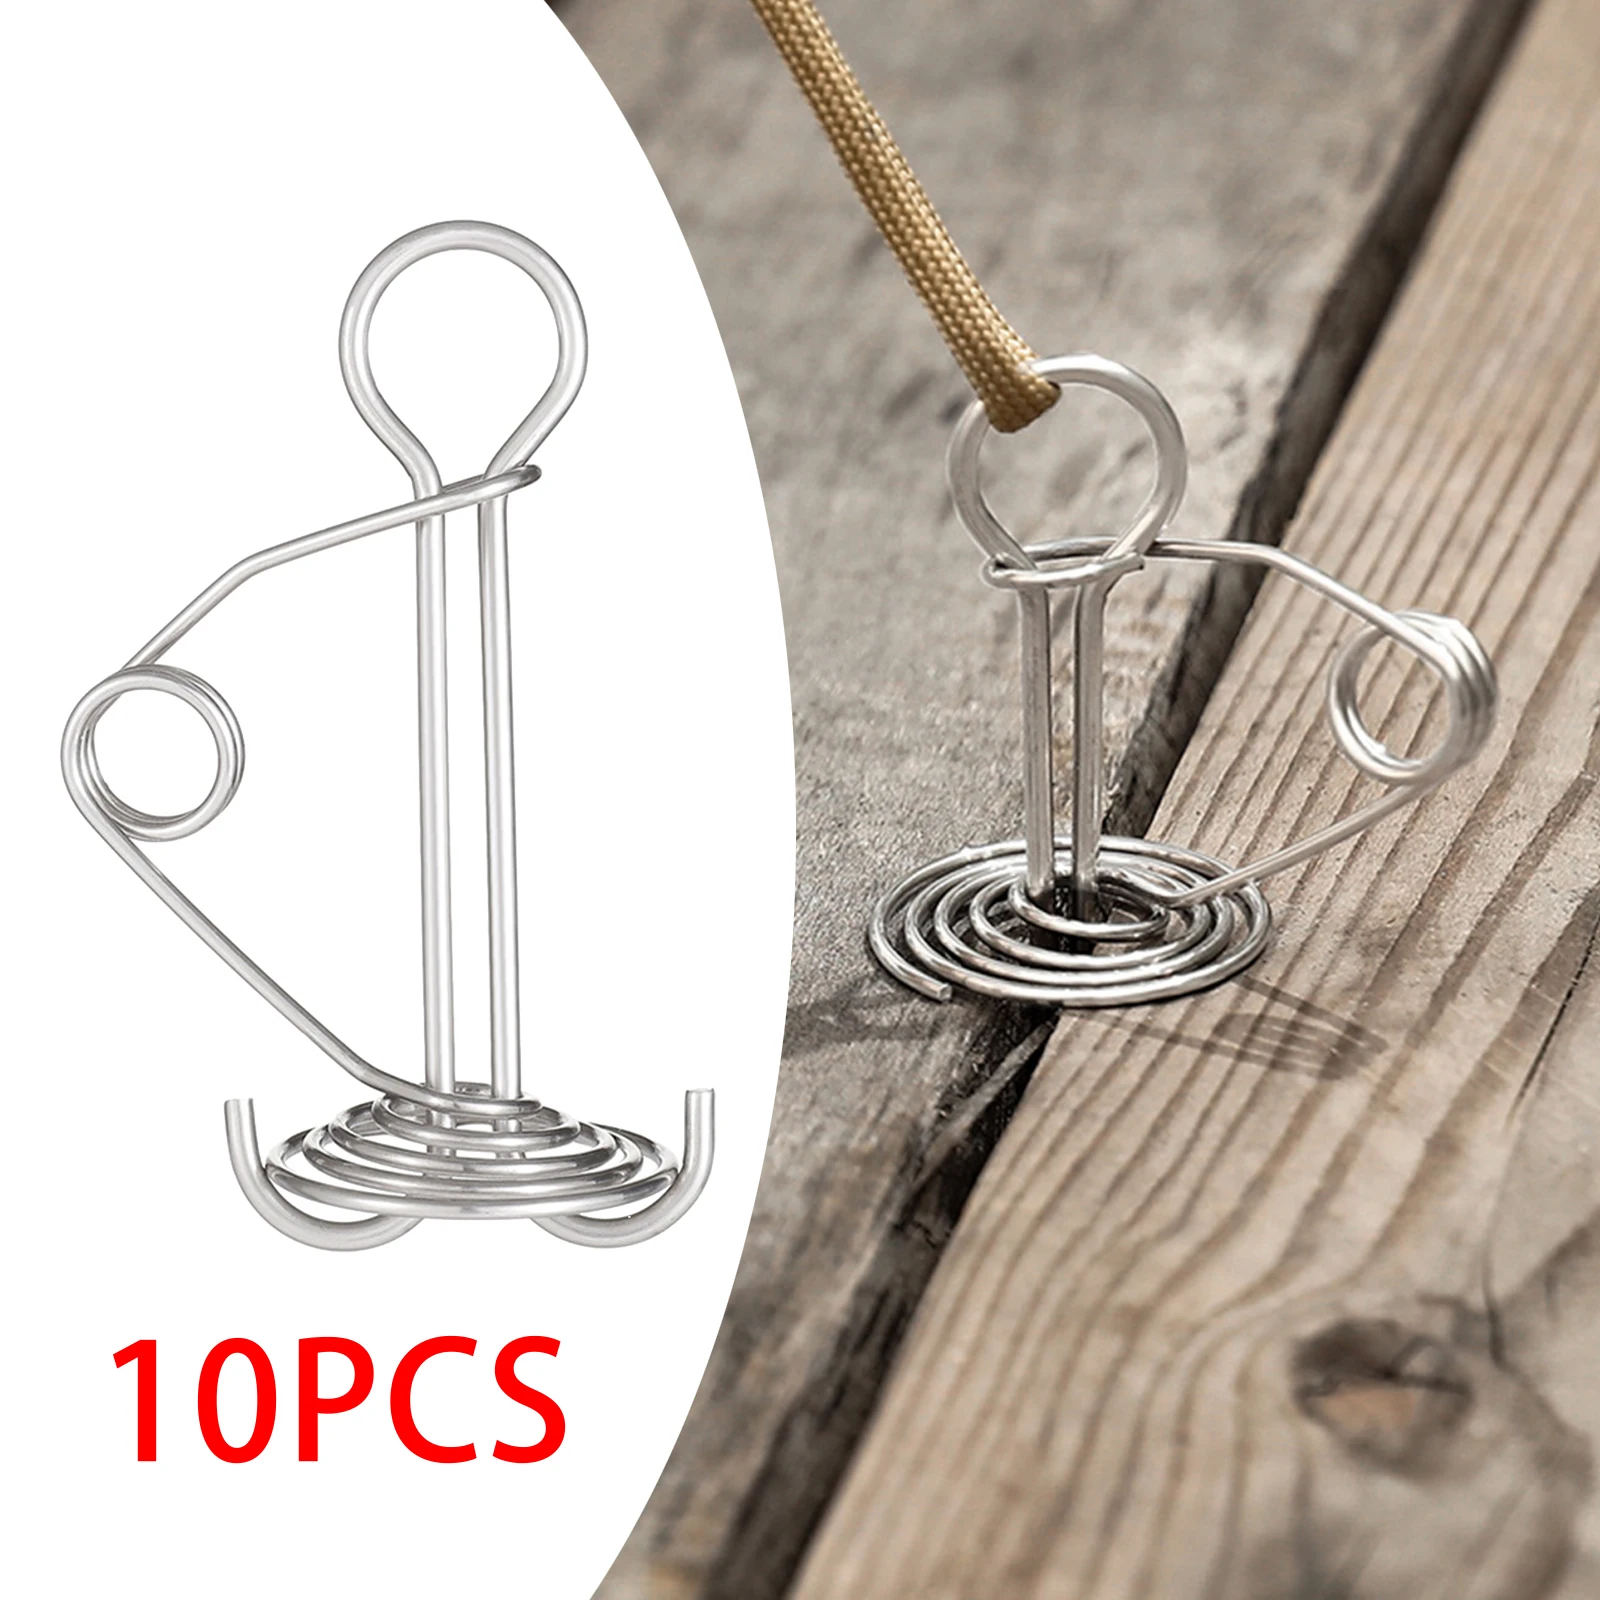 10Pack Tent Rope Tightener Stainless Steel Deck Tie Down Anchor Cord Adjuster Tensioner Outdoor Camping Accessoriness